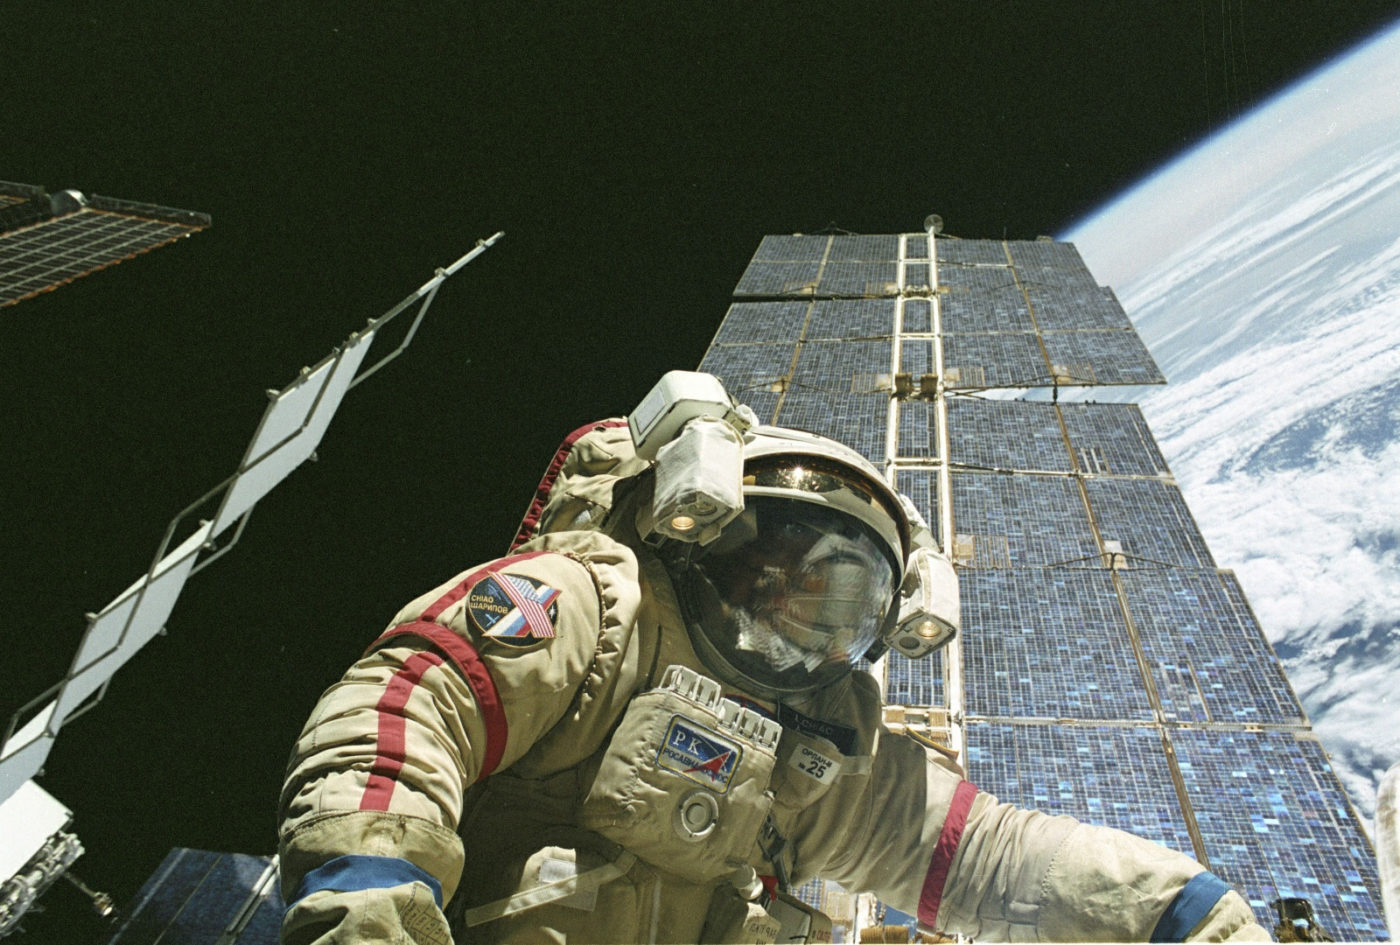 NASA photo of astronaut Leroy Chiao in EVA1 in a Russian Orlan spacesuit.